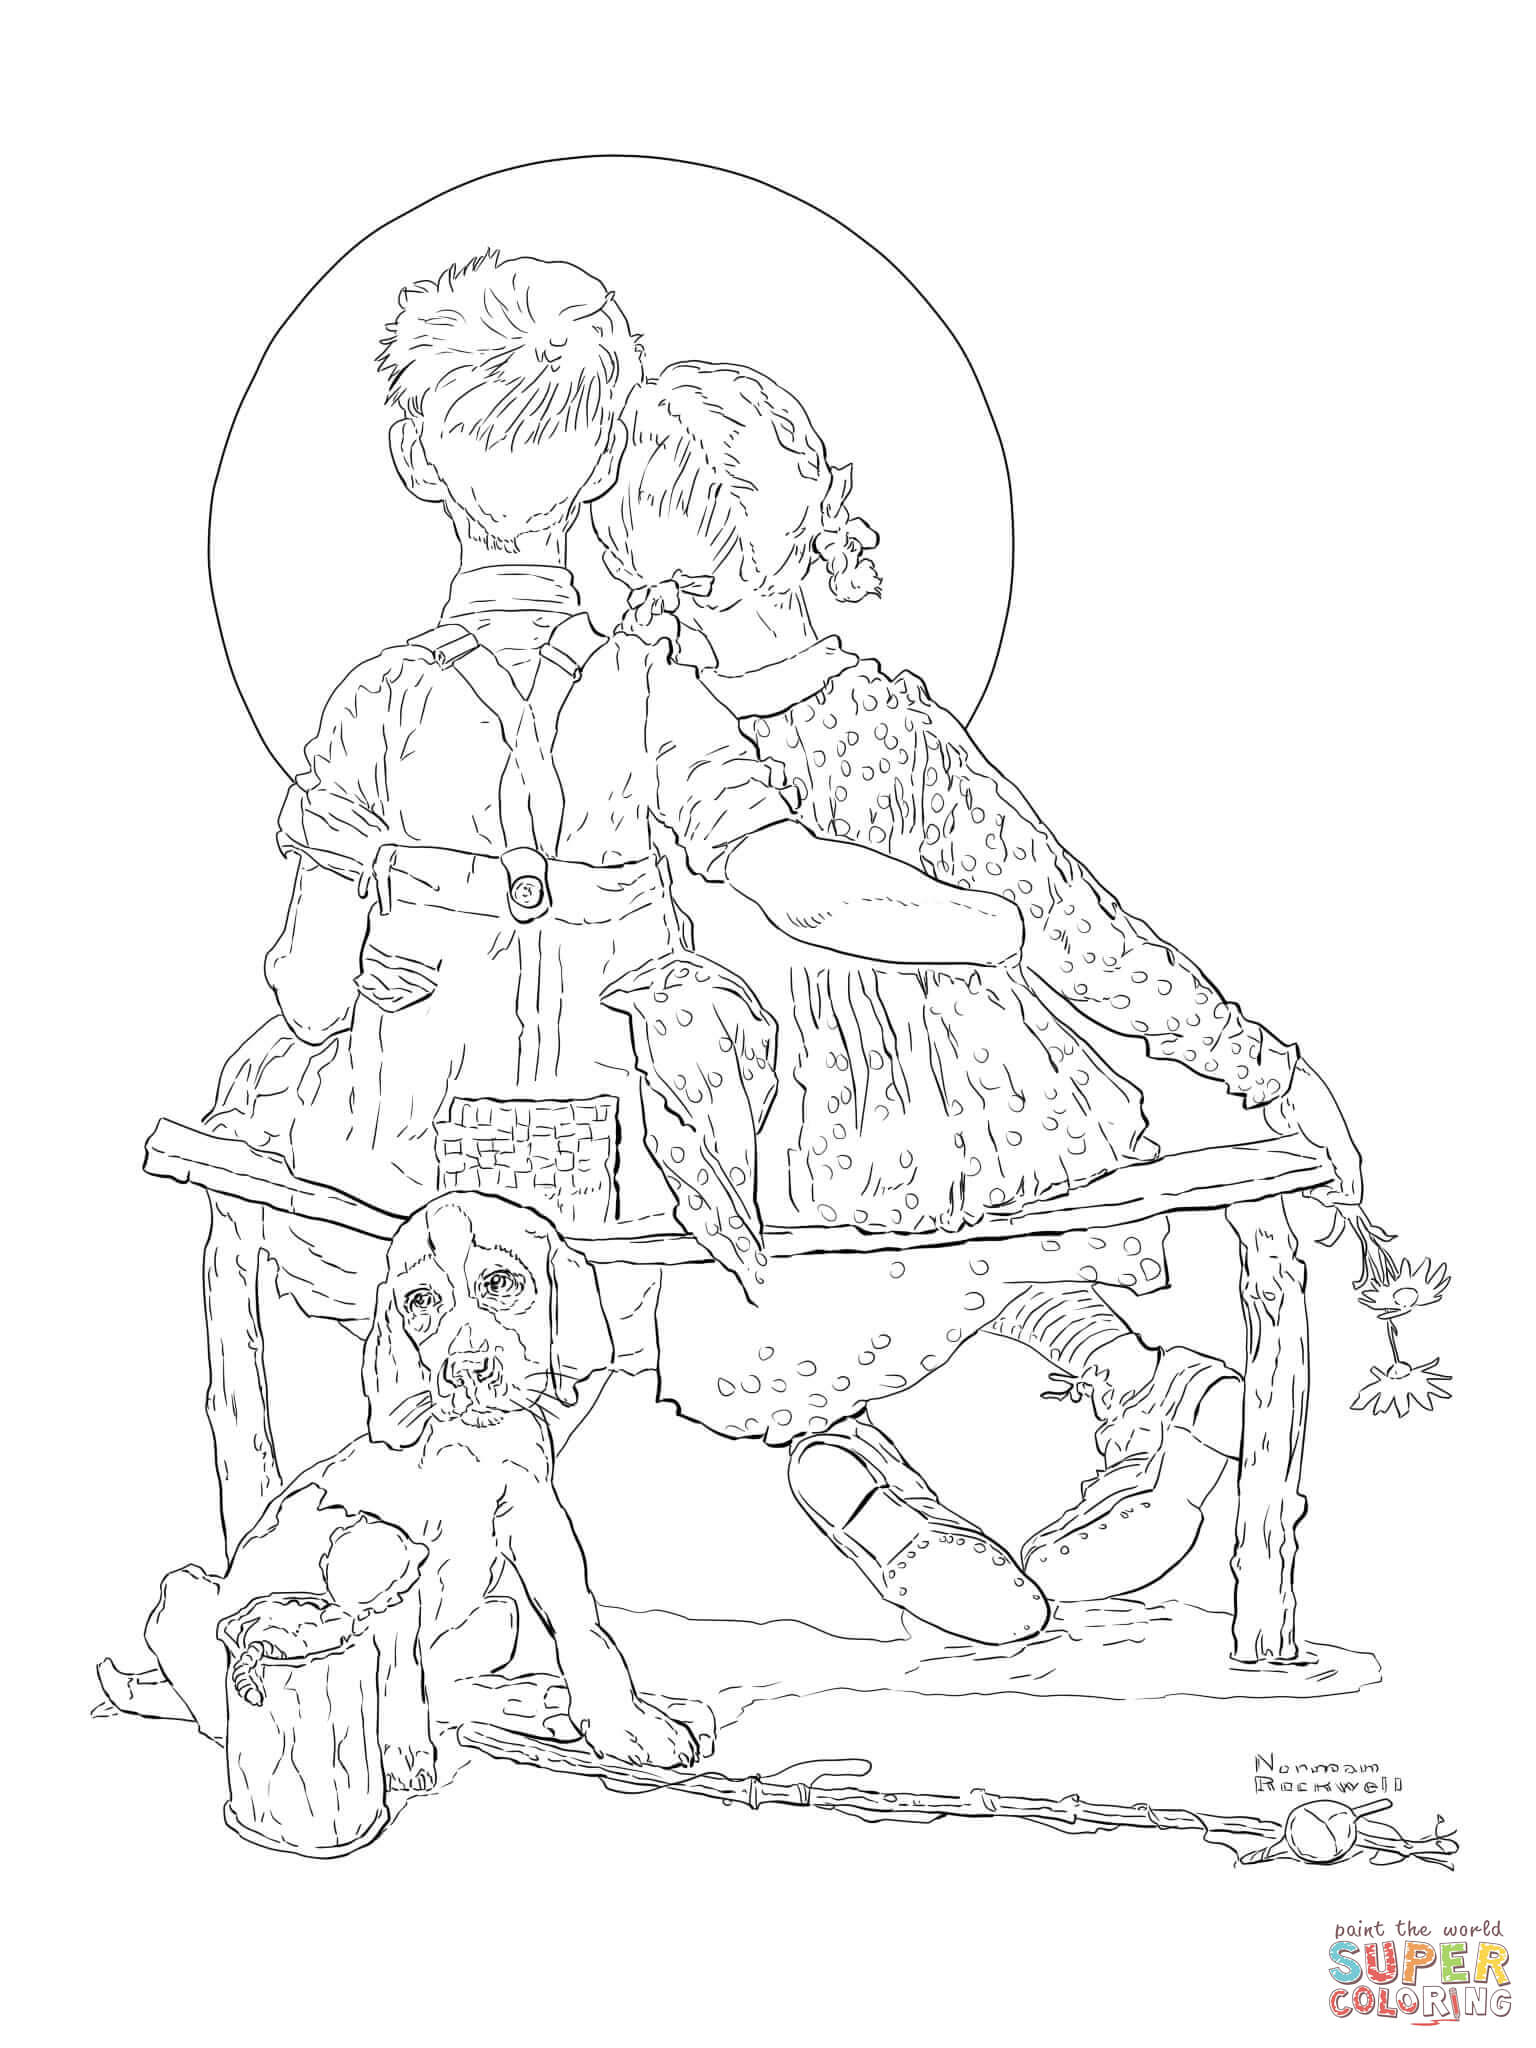 Boy and girl gazing at the moon by norman rockwell coloring page free printable coloring pages